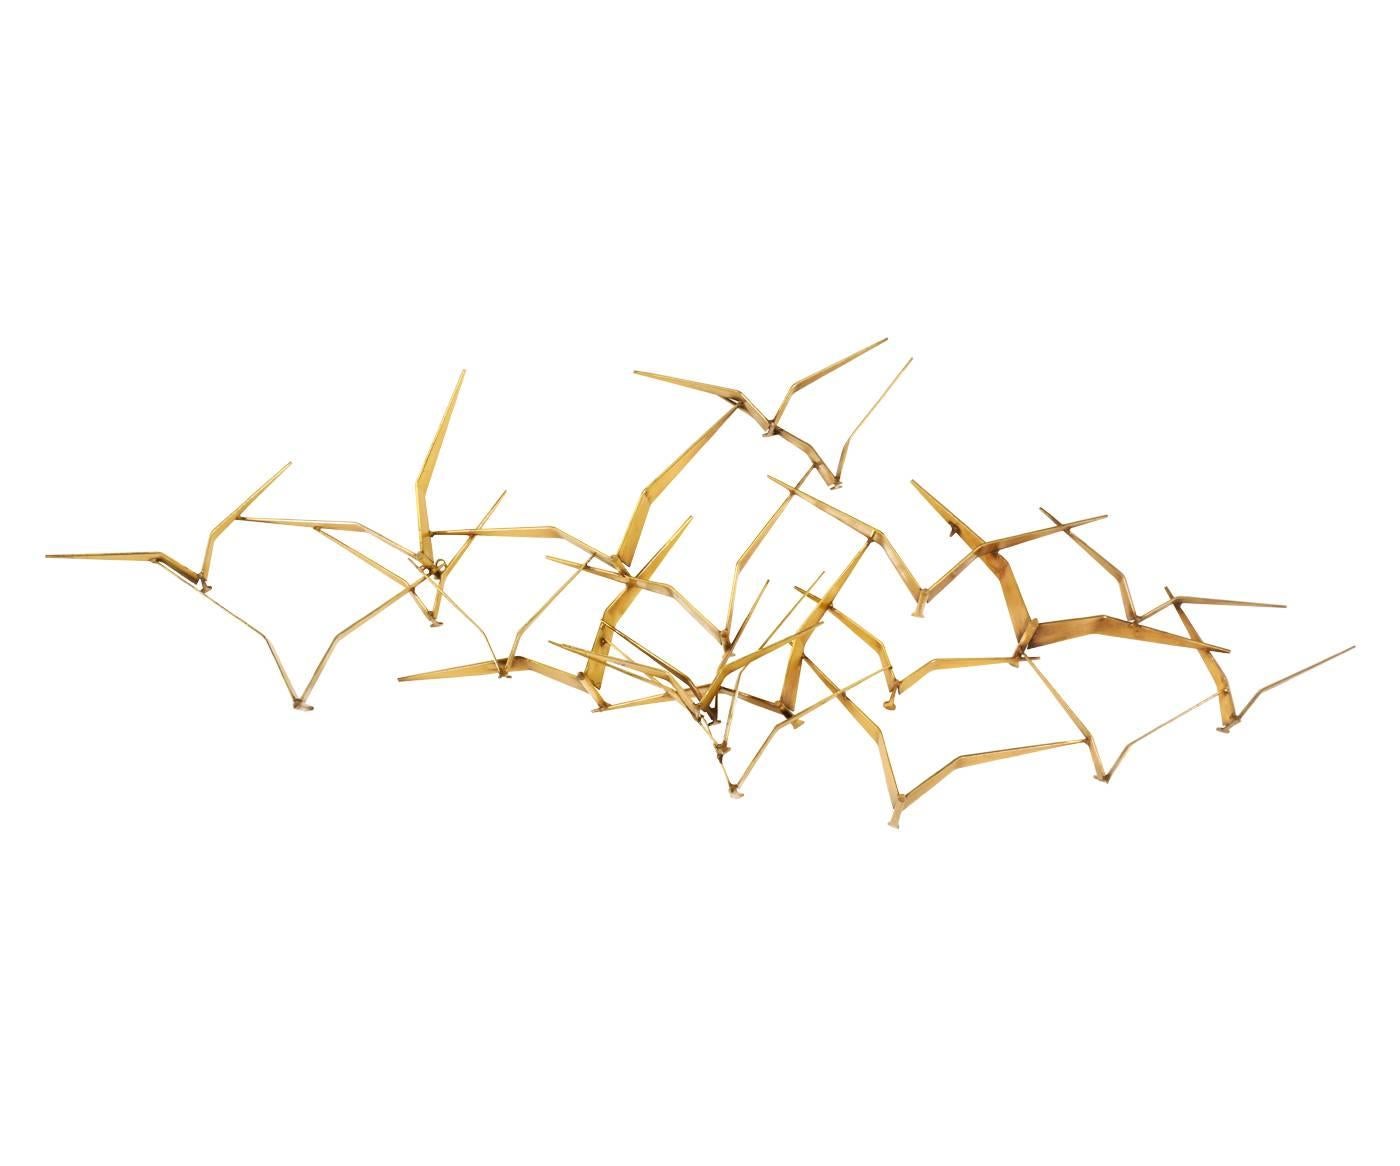 Curtis Jere “Birds in Flight” wall art sculpture for Artisan House. Designer: Curtis Jere.
Manufacturer: Artisan House.
Period/style: Mid-Century Modern.
Country: United States.
Date: 1960s.

Dimensions: 21.25″ H x 58″ L.
Materials: